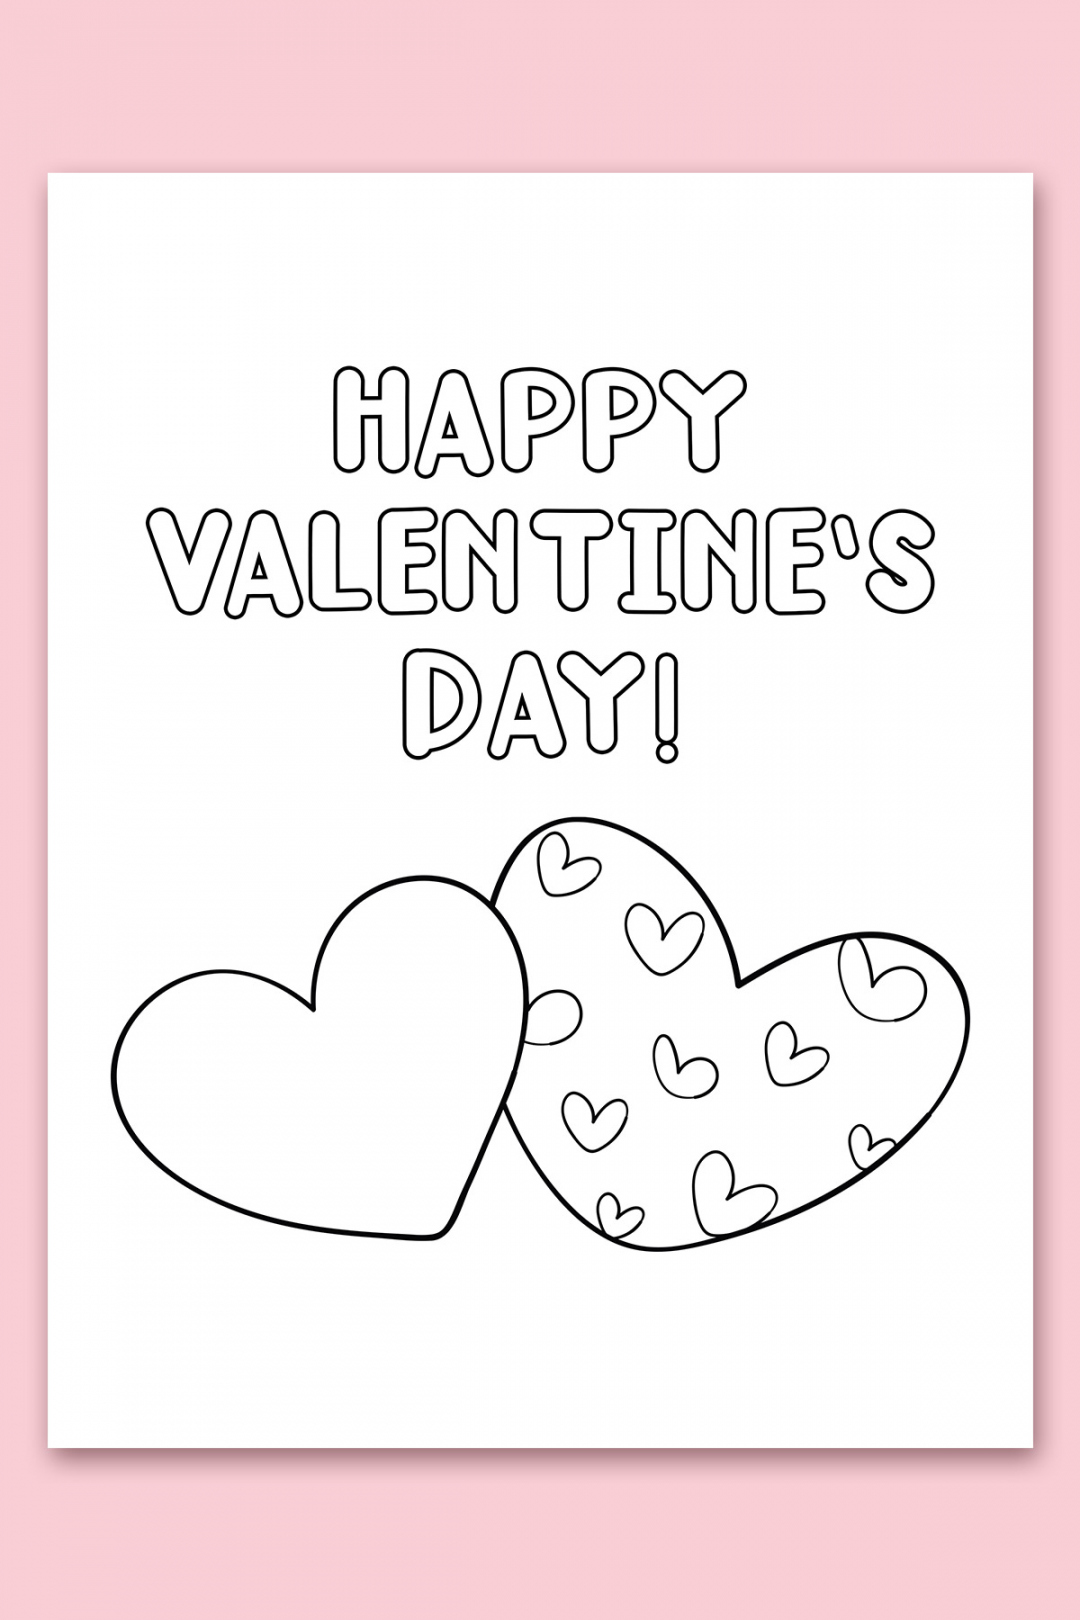 Free Printable Coloring Valentines Day Cards for Kids - FREE Printables - Free Printable Valentine Cards To Color